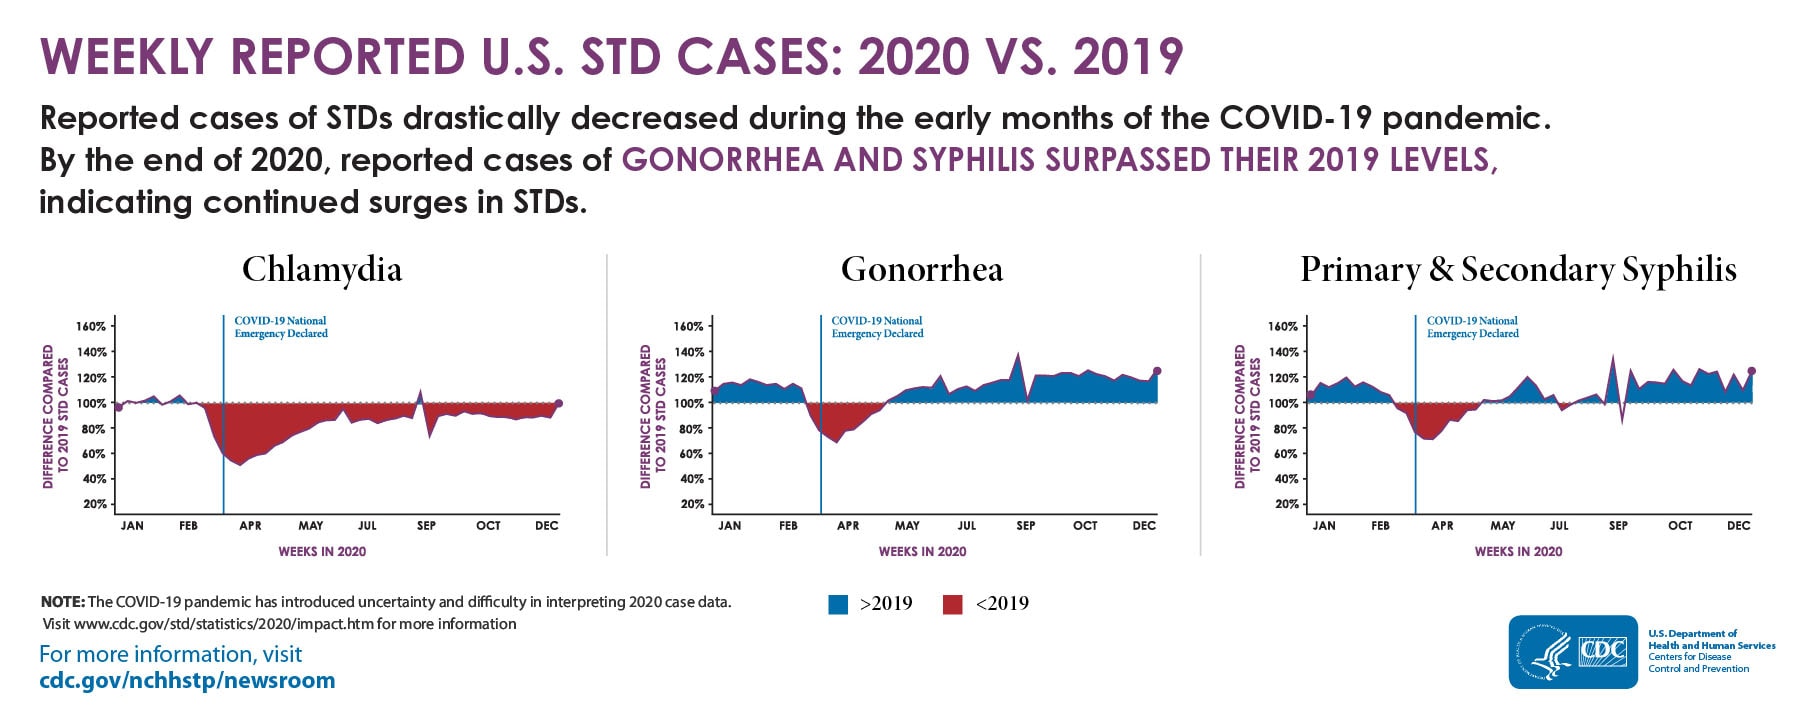 In the early months of the COVID-19 pandemic, reported cases of STDs decreased, but by the end of 2020, reported cases of gonorrhea and syphilis surpassed 2019 levels.